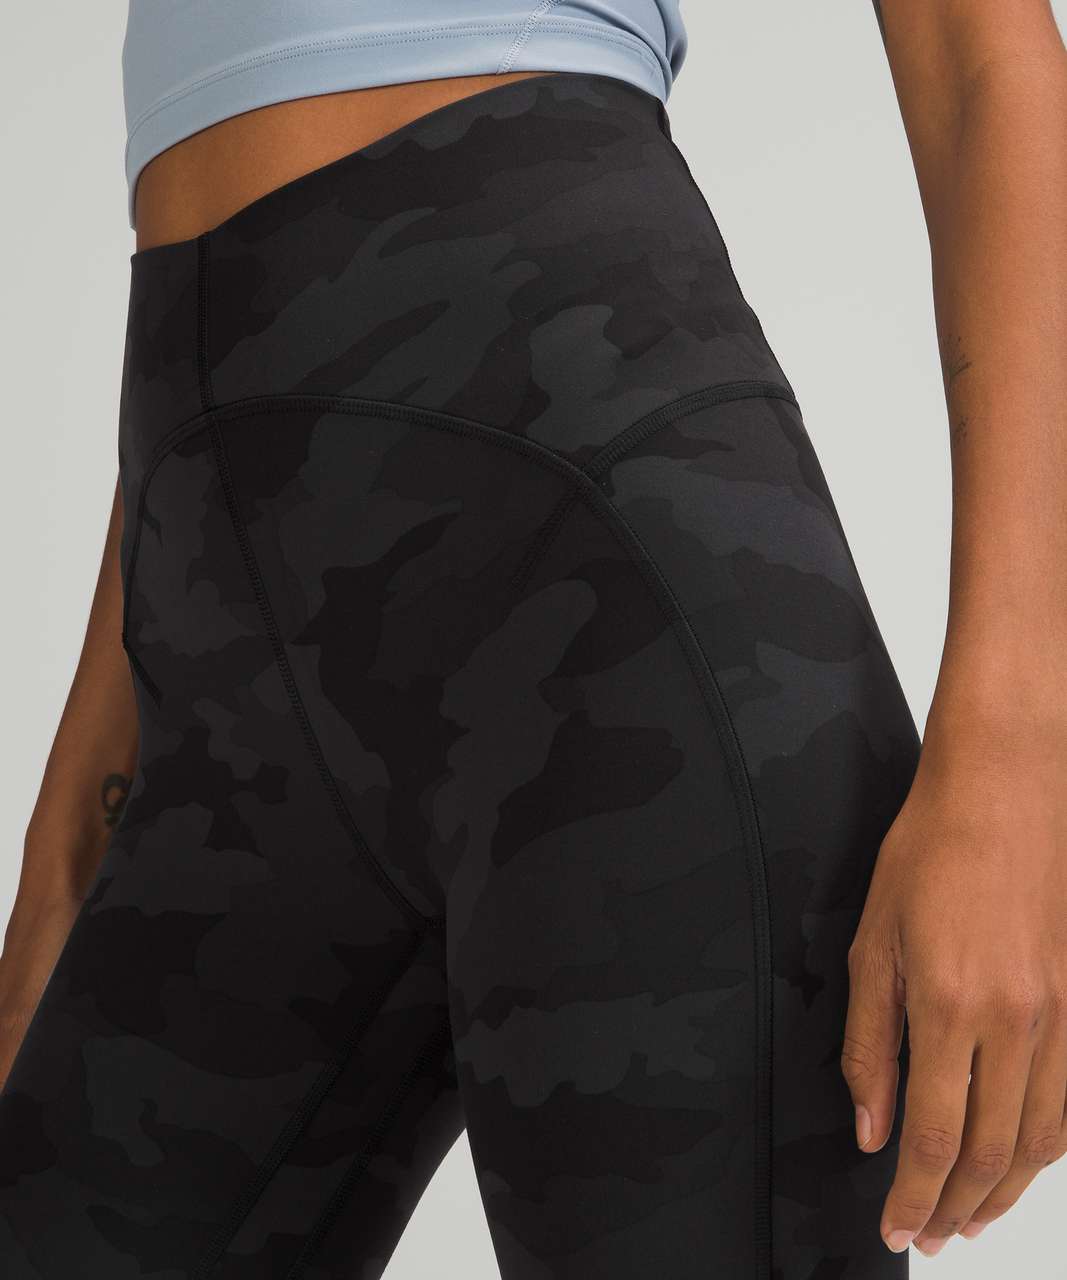 Lululemon Fast and Free High-Rise Tight 25 - Heritage 365 Camo